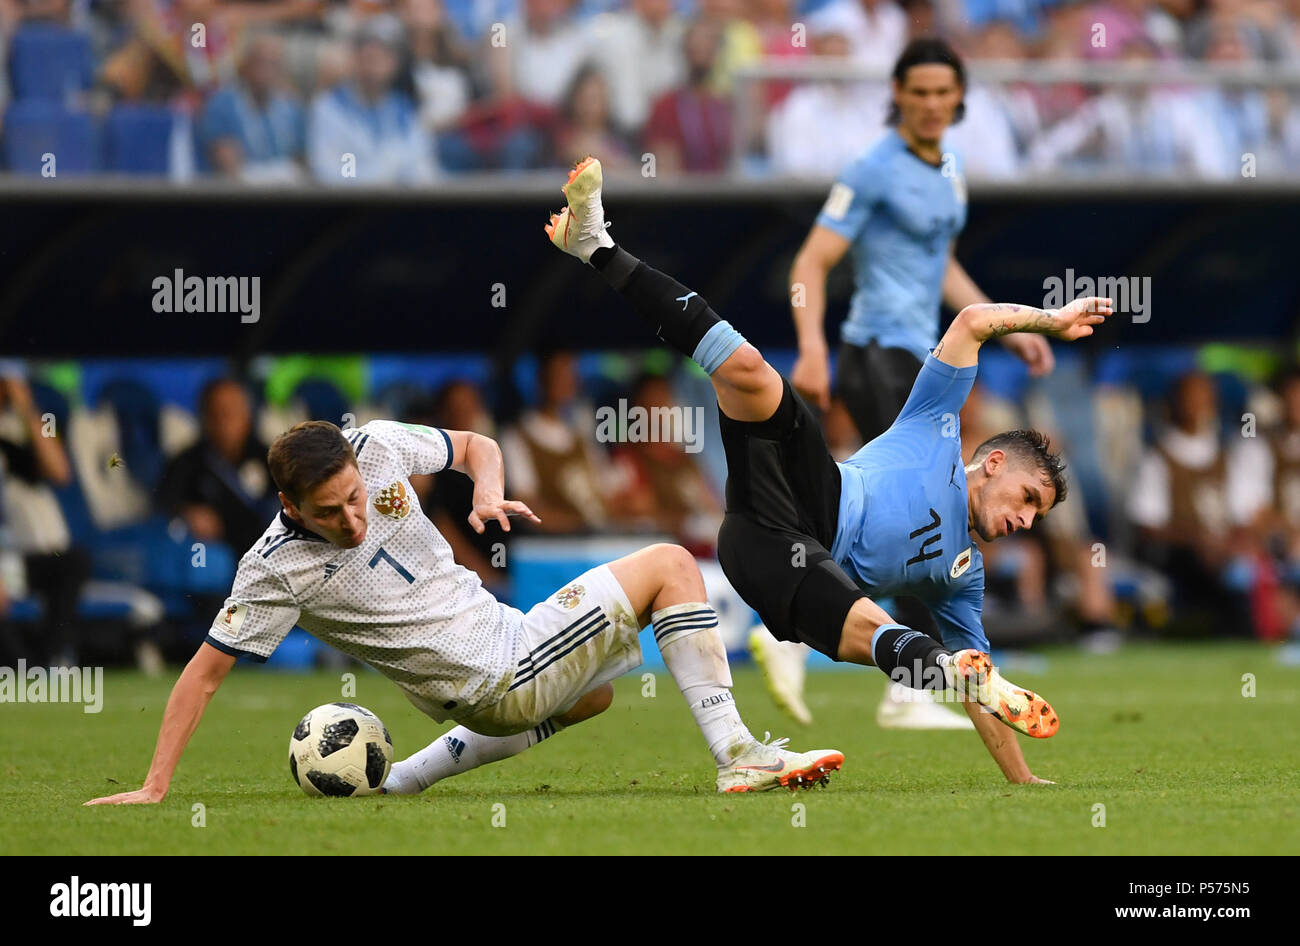 Samara, Russia. 25th June, 2018. Soccer: World Cup, group stages, group A, 3rd matchday Uruguay vs Russia, at Samara Stadium. Russia's Daler Kuzyayev (L) and Uruguay's Lucas Torreira vie for the ball. Credit: Marius Becker/dpa/Alamy Live News Stock Photo